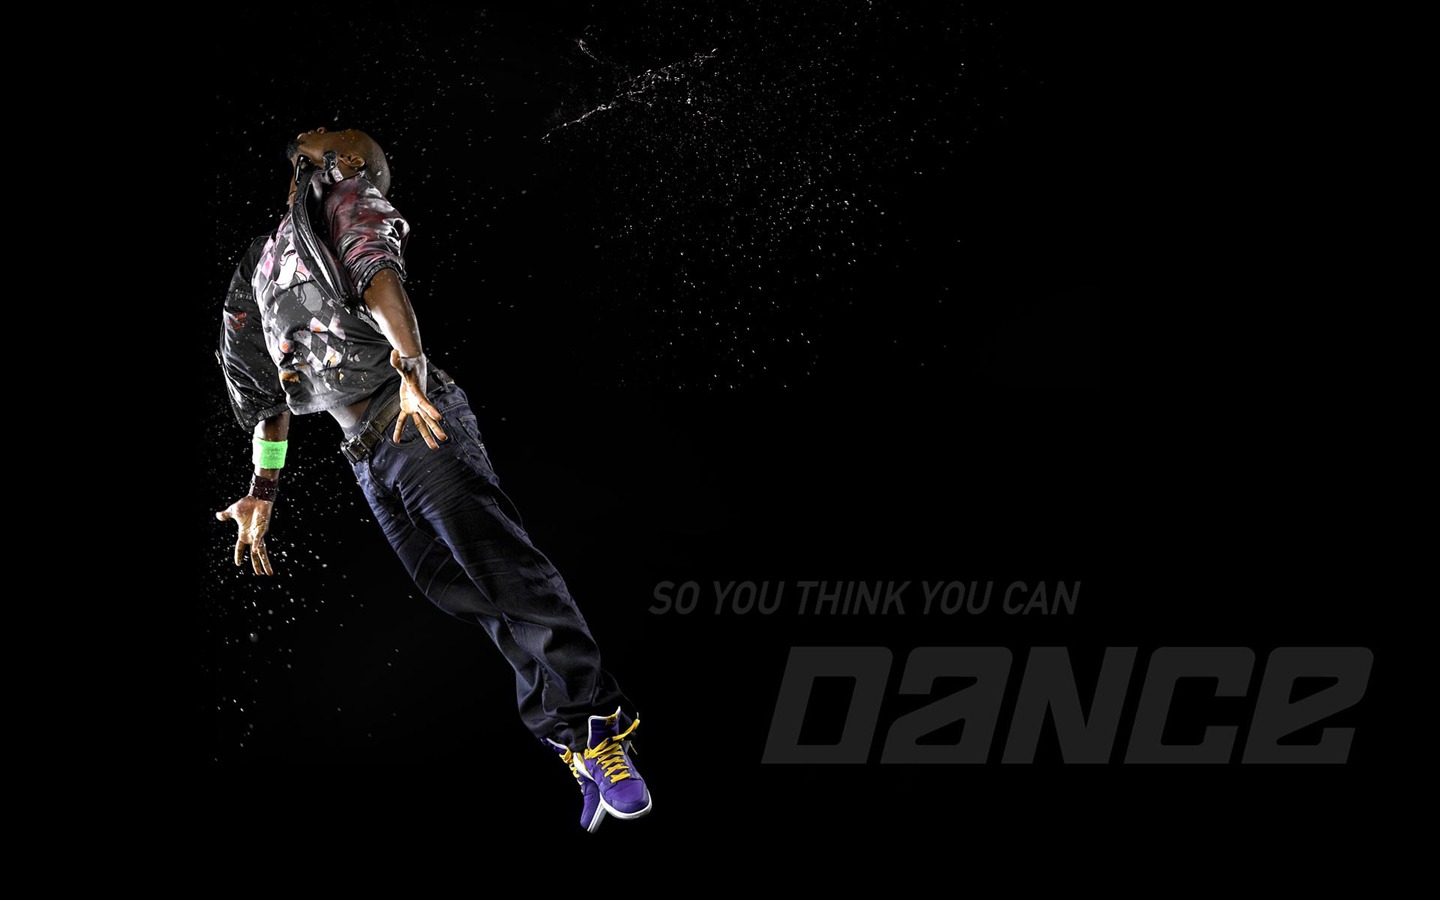 So You Think You Can Dance 舞林爭霸壁紙(一) #10 - 1440x900